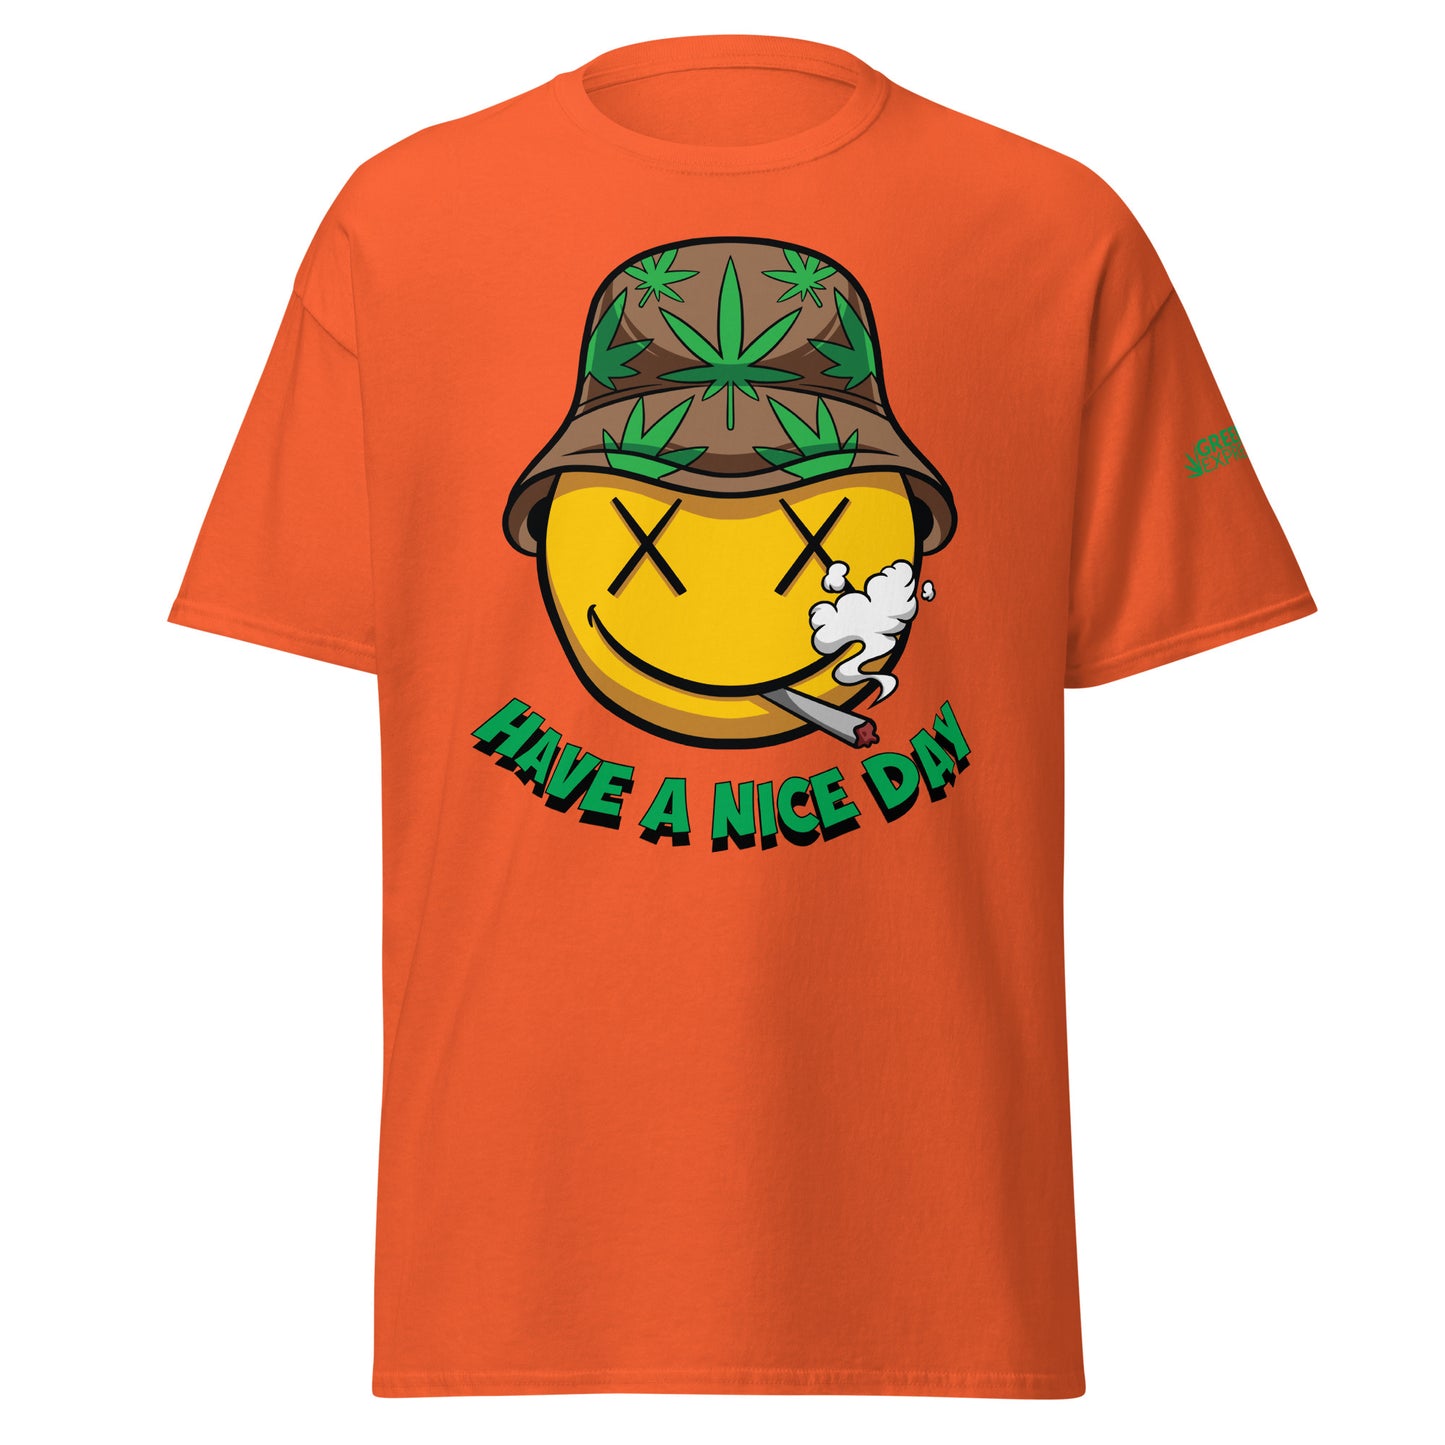 GREEN LEAF EXPRESSIONS: HAVE A NICE DAY (CLASSIC TEE)